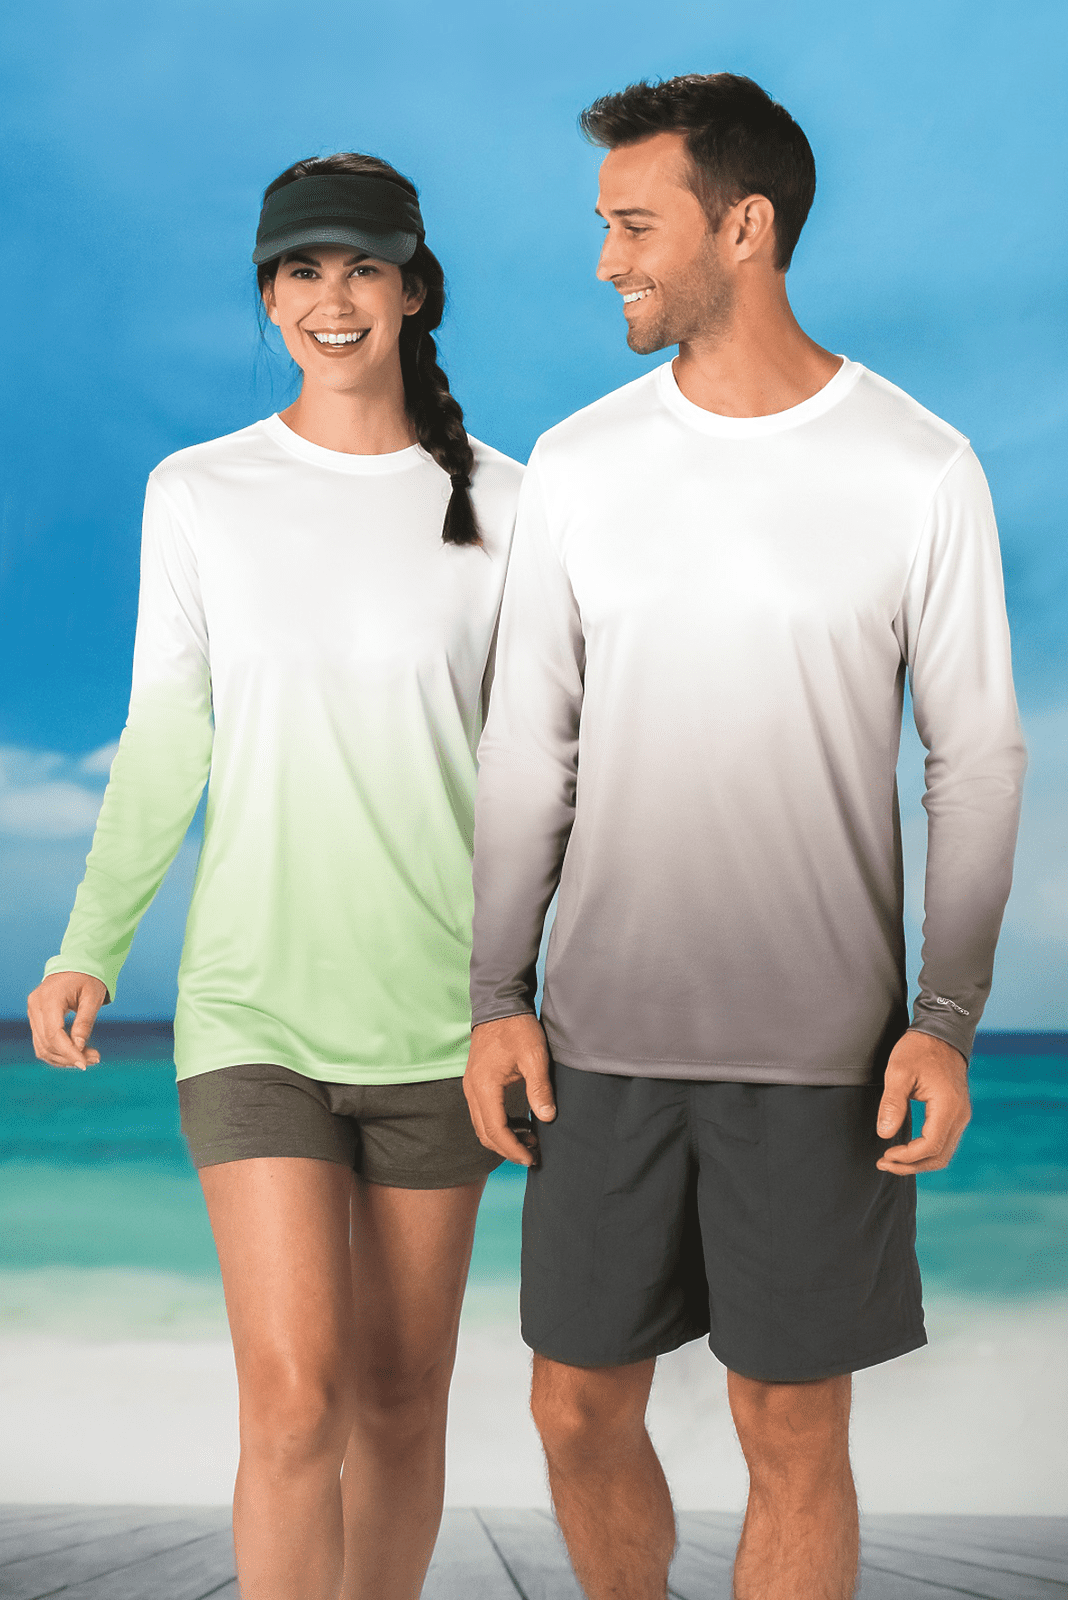 Paragon 233 Maui Performance Long Sleeve T-Shirt - Pale Yellow - HIT a Double